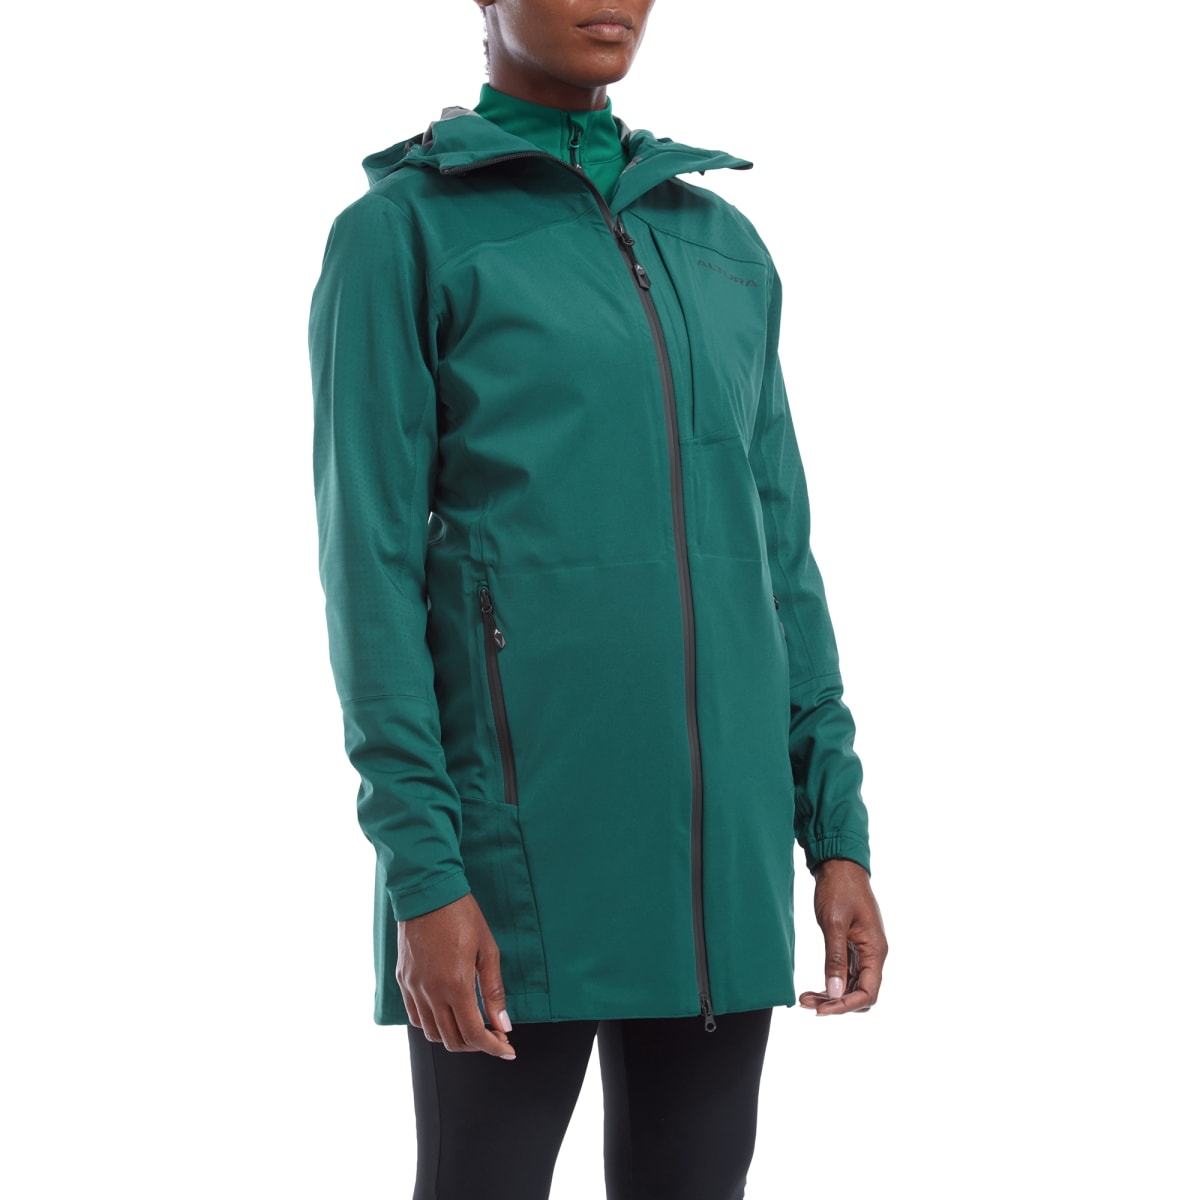 Altura  Nightvision Zephyr Womens Stretch Jacket 10 GREEN/TEAL